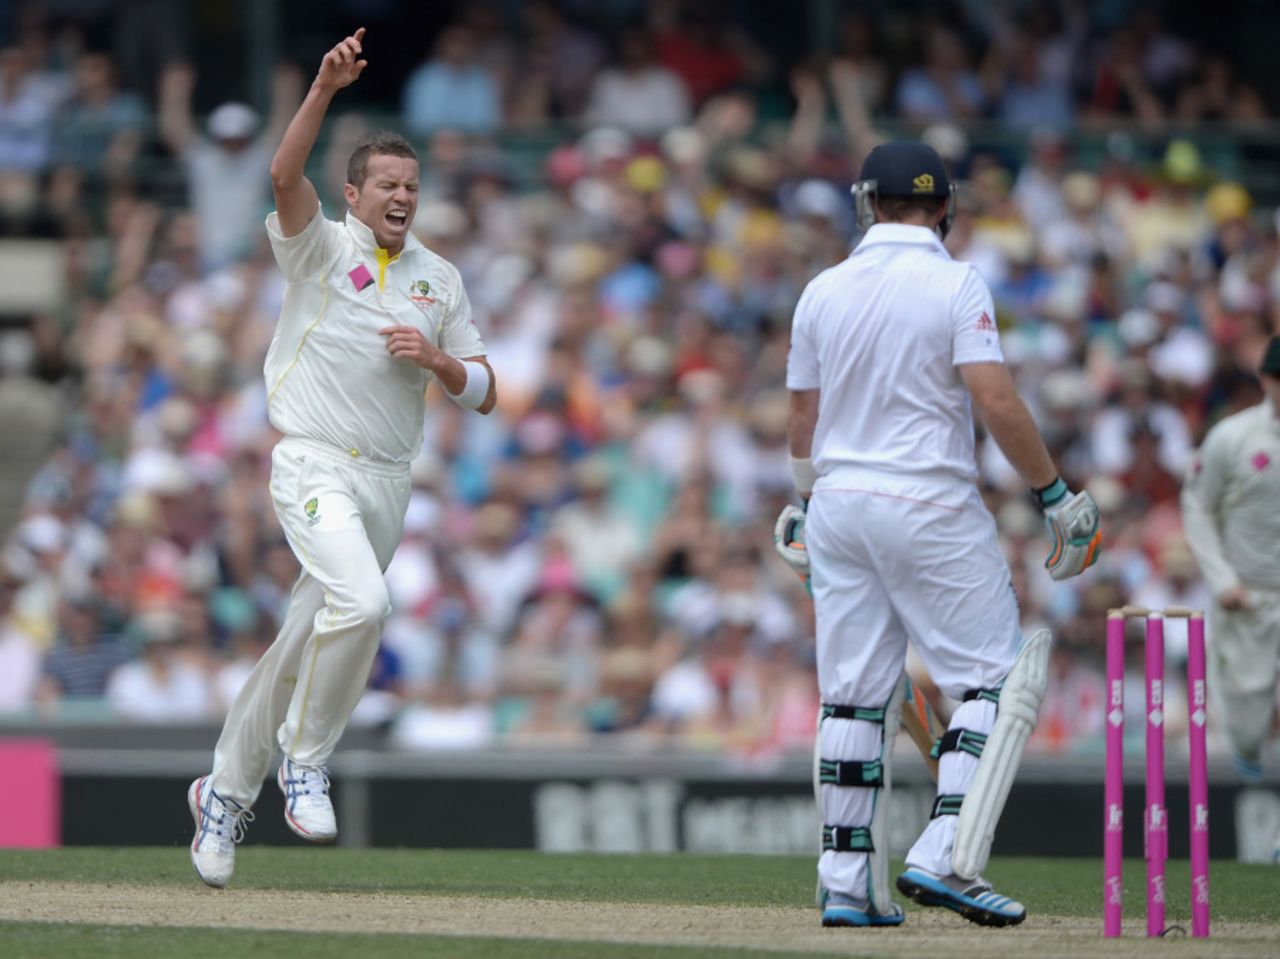 Peter Siddle had Ian Bell caught behind, Australia v England, 5th Test, Sydney, 2nd day, January 4, 2014